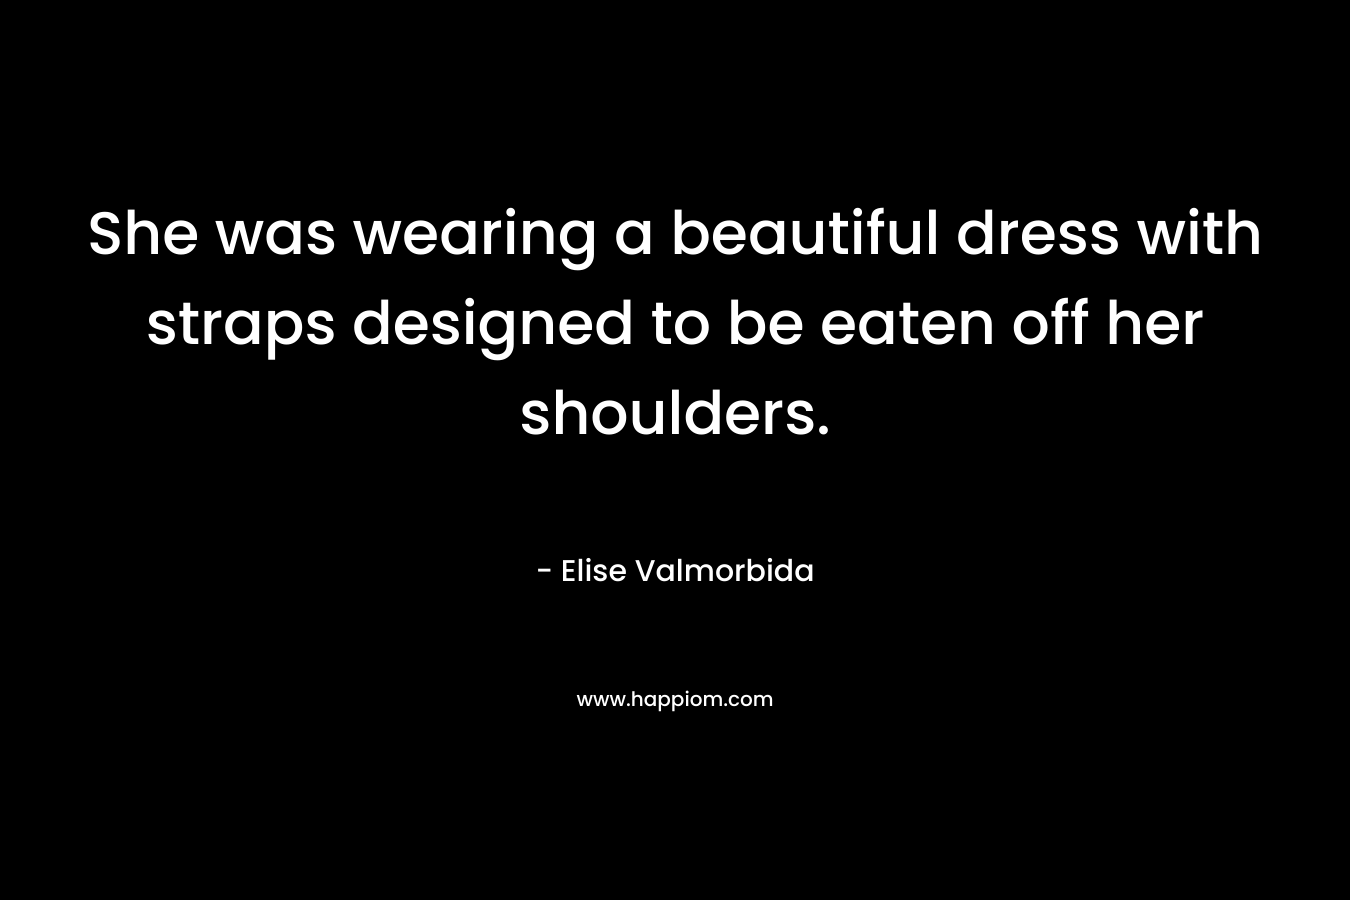 She was wearing a beautiful dress with straps designed to be eaten off her shoulders. – Elise Valmorbida